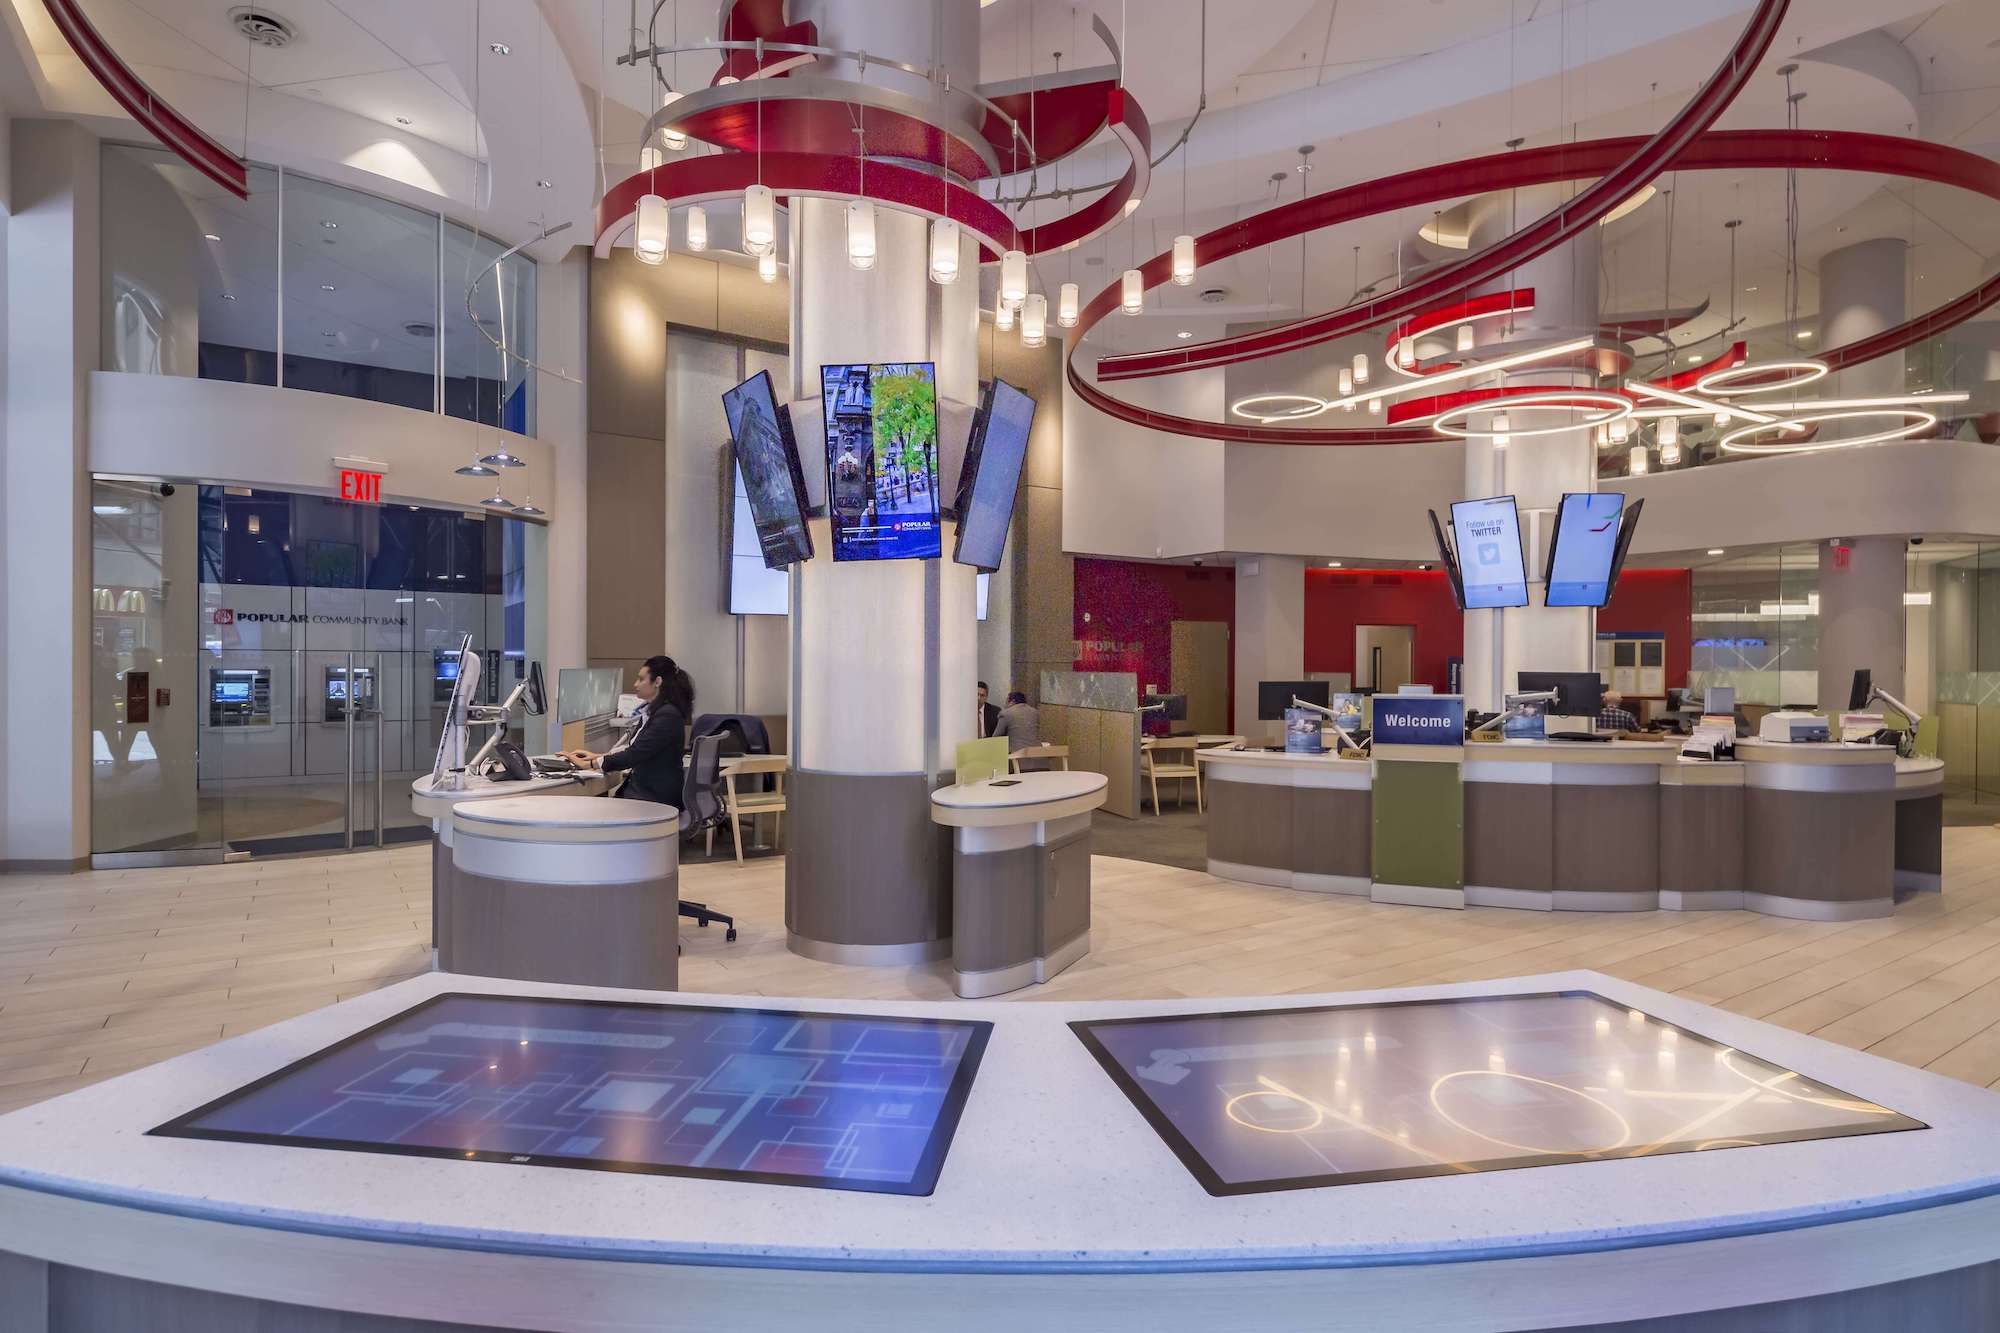 A financial institution interior featuring interactive digital counter displays, overhead digital signage, and a central seating area under stylish hanging lights.